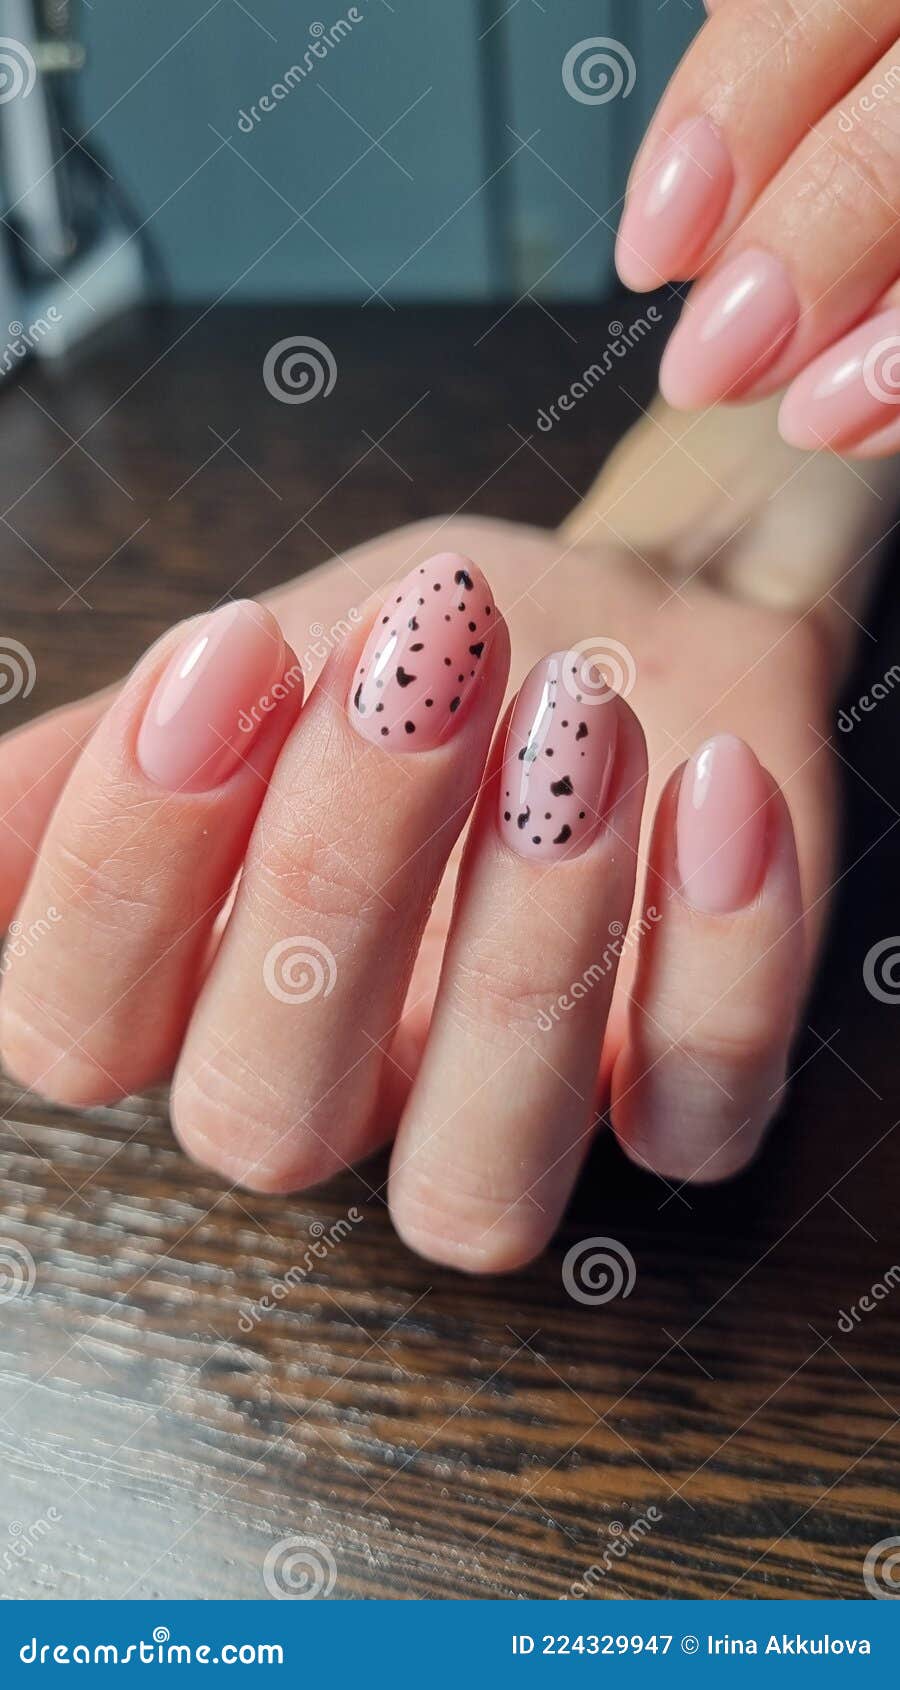 Amazon.com: Press On Nail Tips Pink Color Soild Color Glitter Top Medium  Coffin Fingernails Reusable Manicure Salons At Home Full Cover Acrylic Nails  For Daily Wear Office Lovely Cute Cool Style Nails